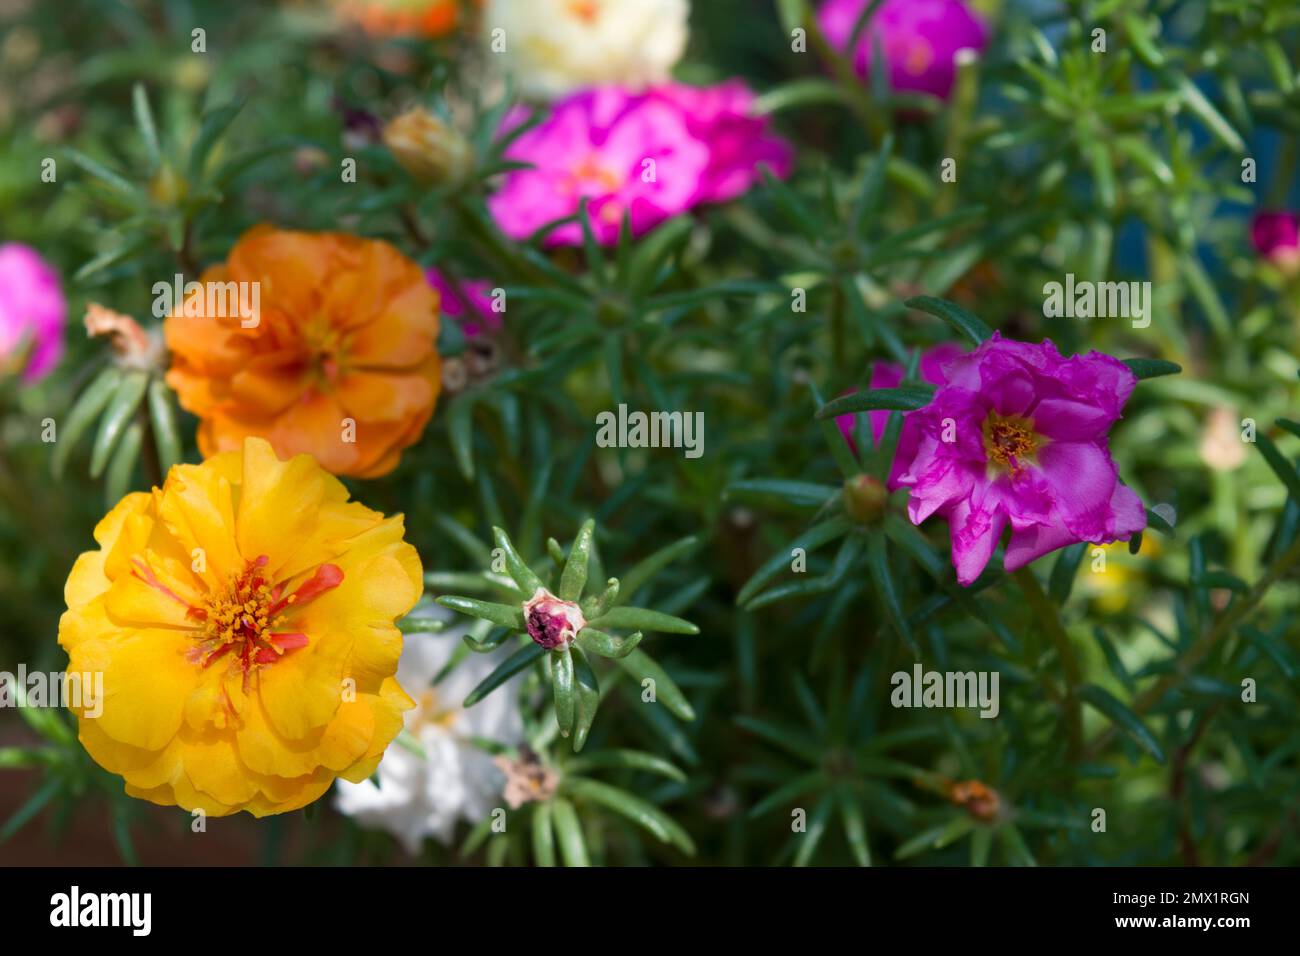 Portulaca grandiflora, a flowering plant cultivated in gardens. Common names  include rose moss, eleven o'clock, Mexican,  moss, sun rose, rock rose. Stock Photo